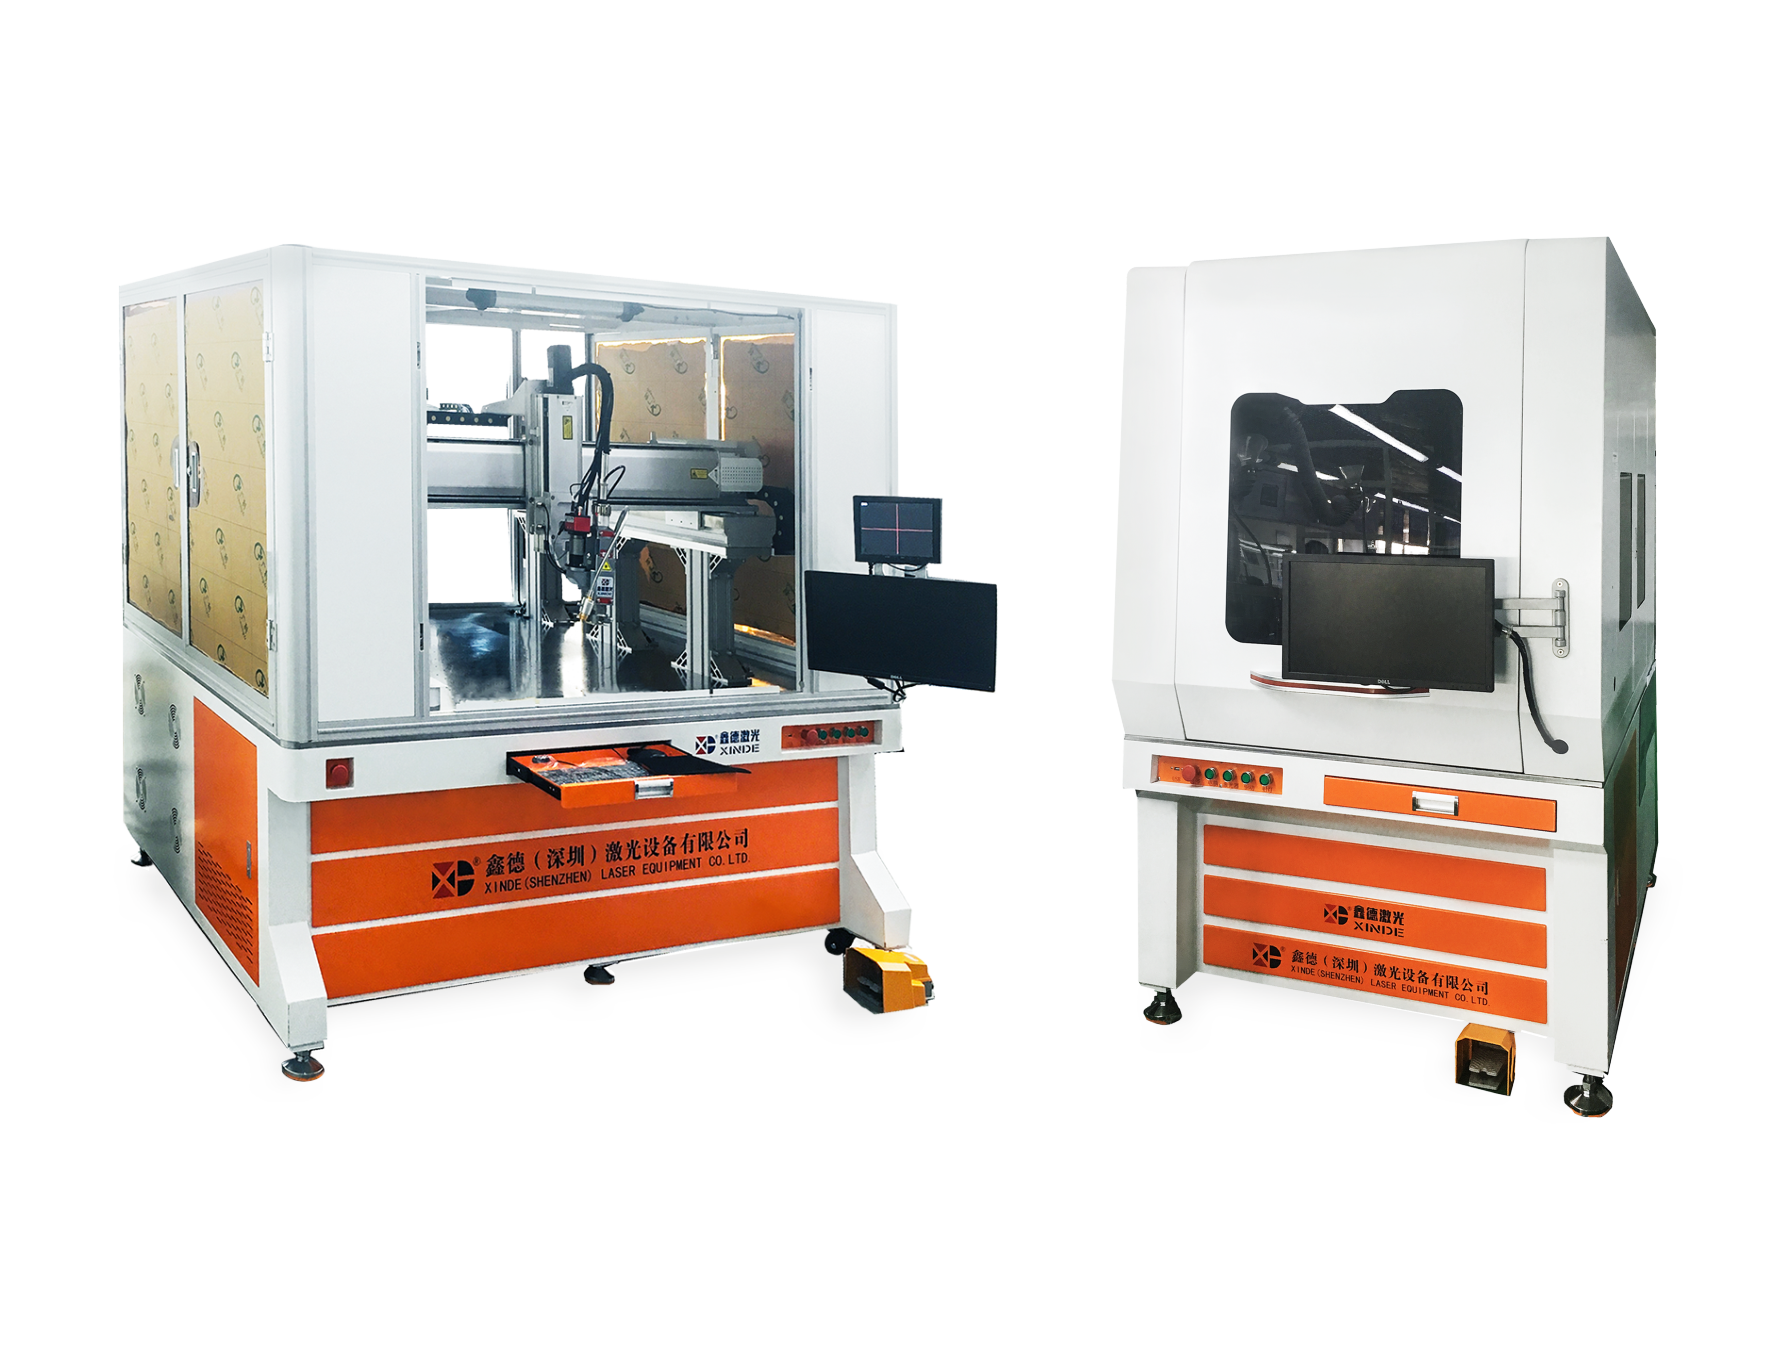 What are the methods to improve the efficiency of laser welding machine equipment